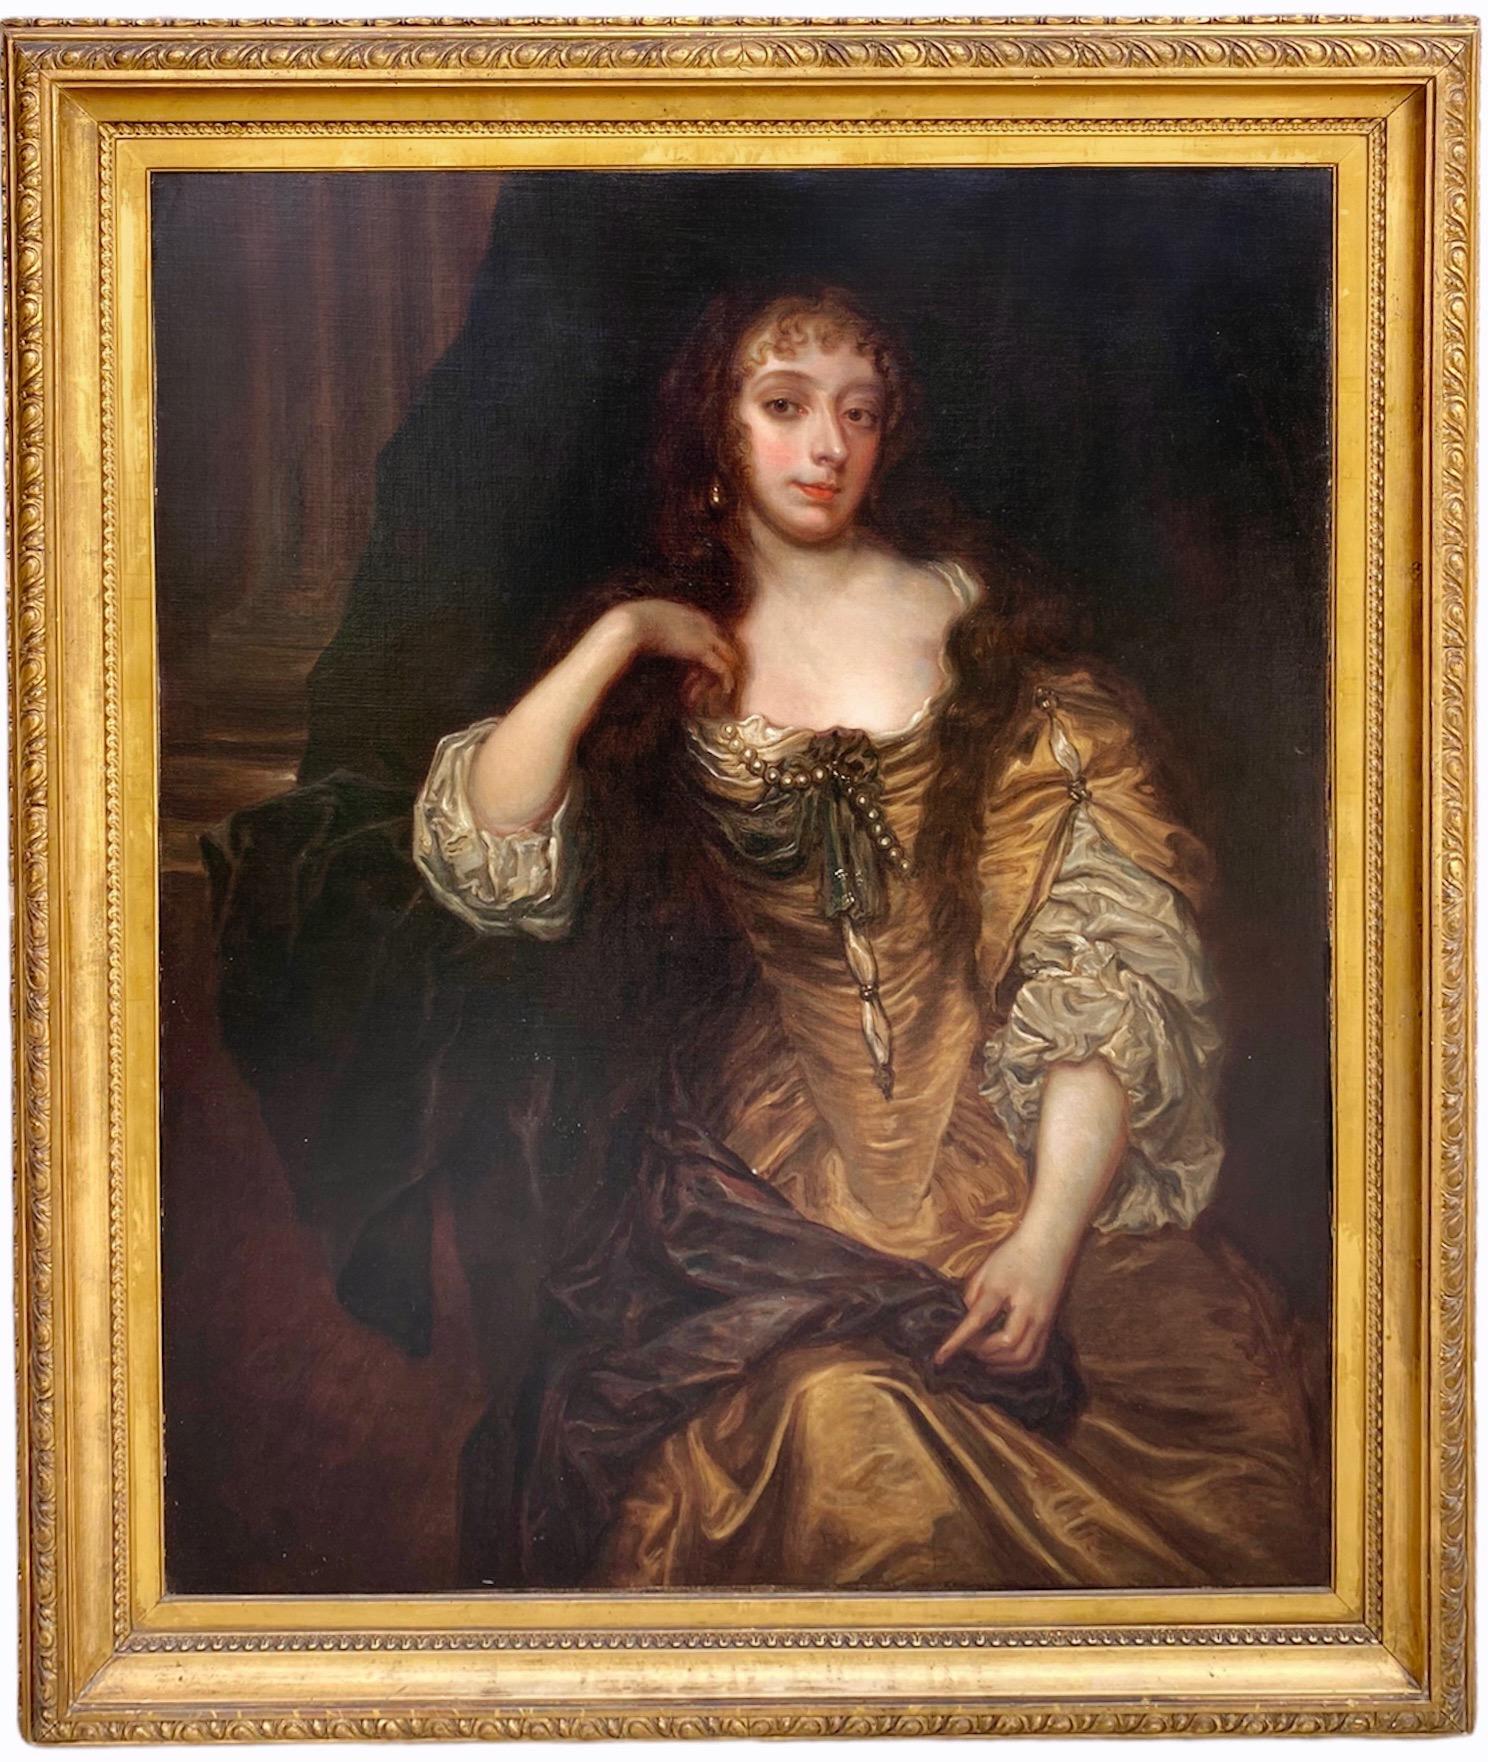 (follower of) Peter Lely Figurative Painting - Huge Antique British portrait painting of a Noble Woman - Peter Lely Pearls